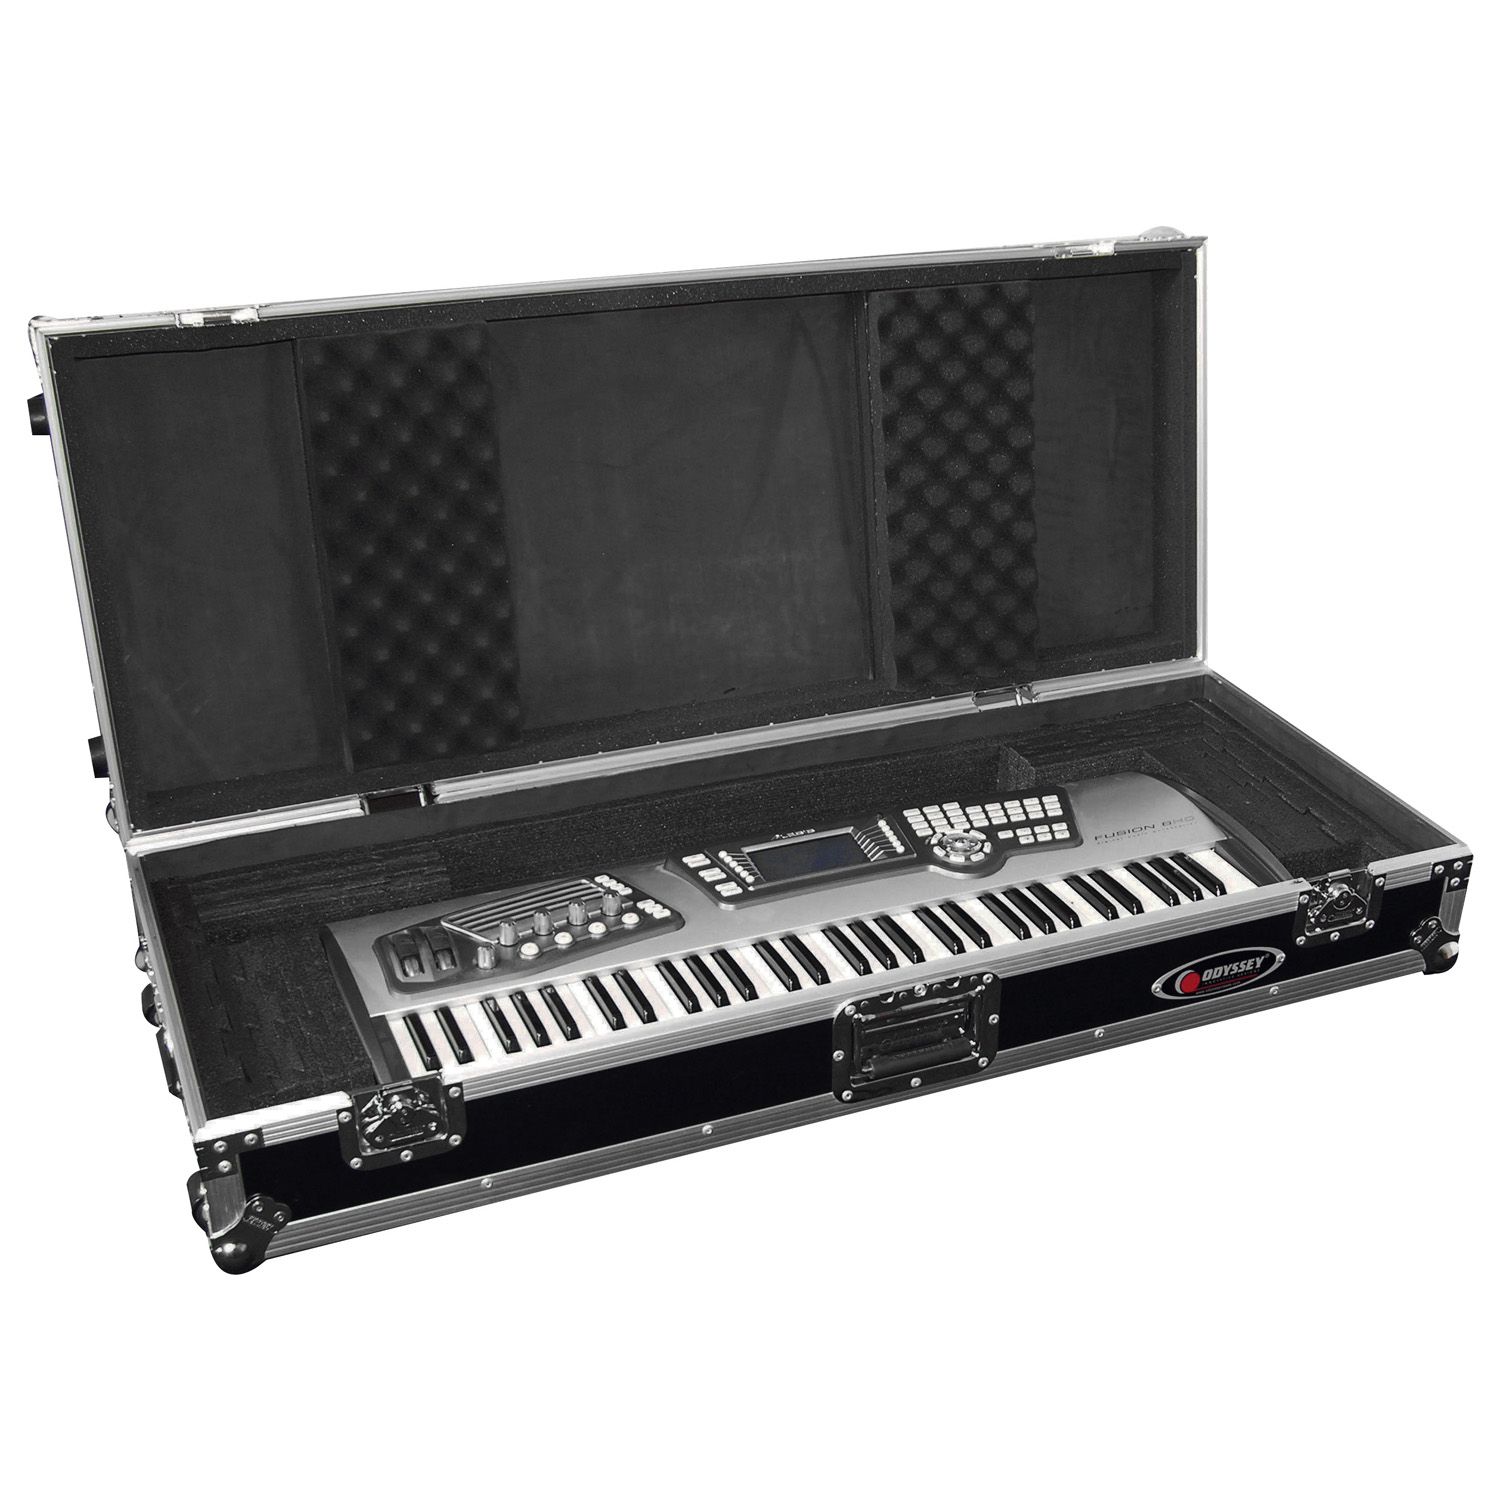 Chicle flor Complacer 61 Note Keyboard Flight Case - Odyssey Cases